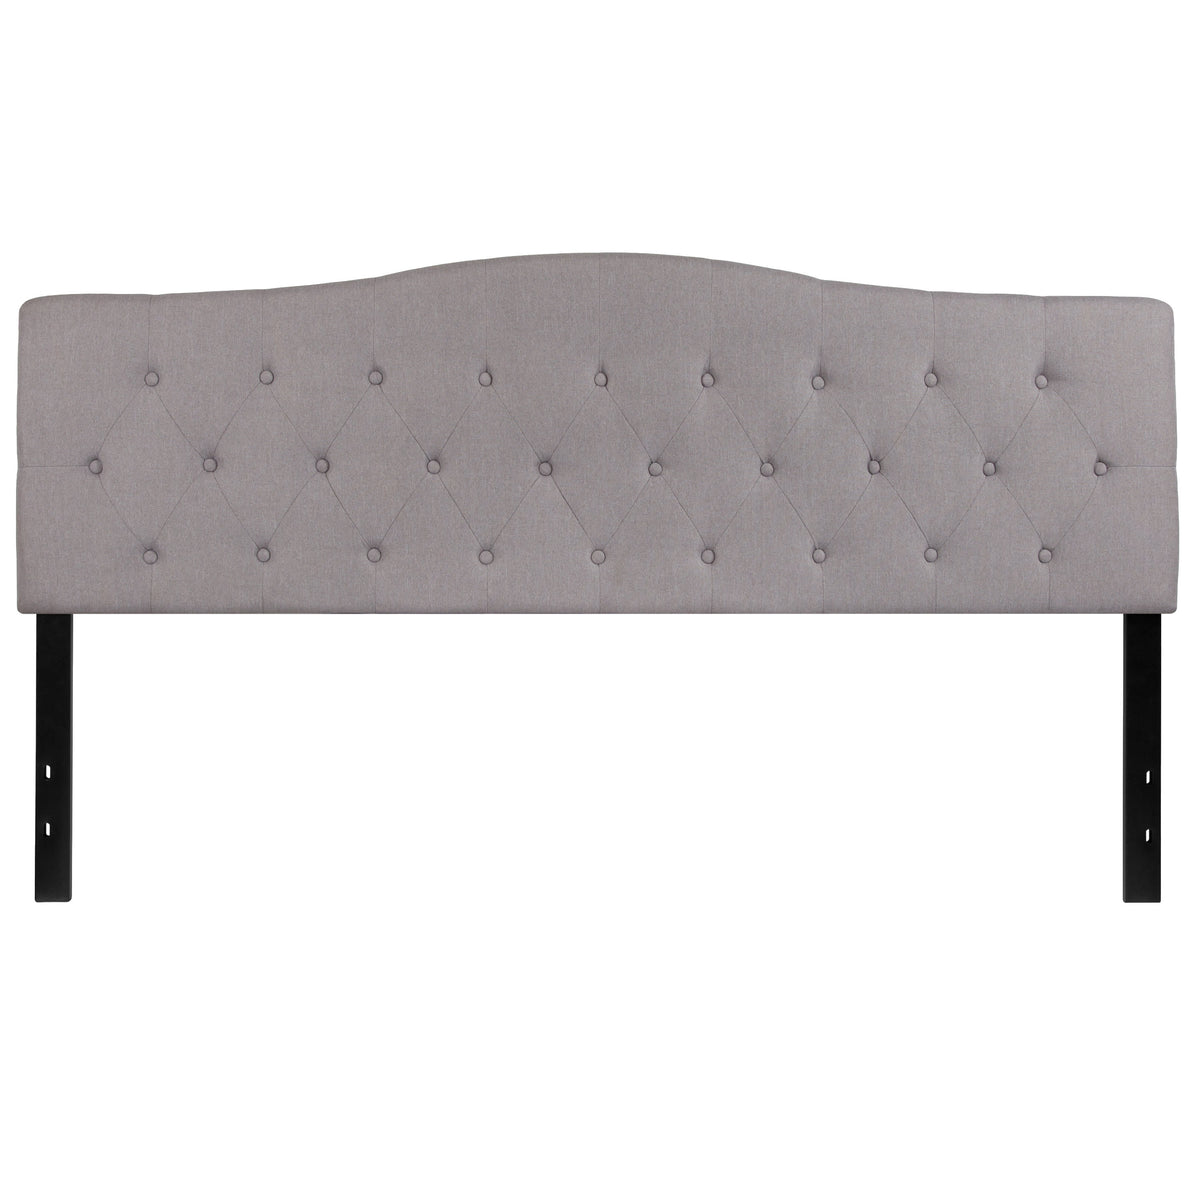 Light Gray,King |#| Arched Button Tufted Upholstered King Size Headboard in Light Gray Fabric